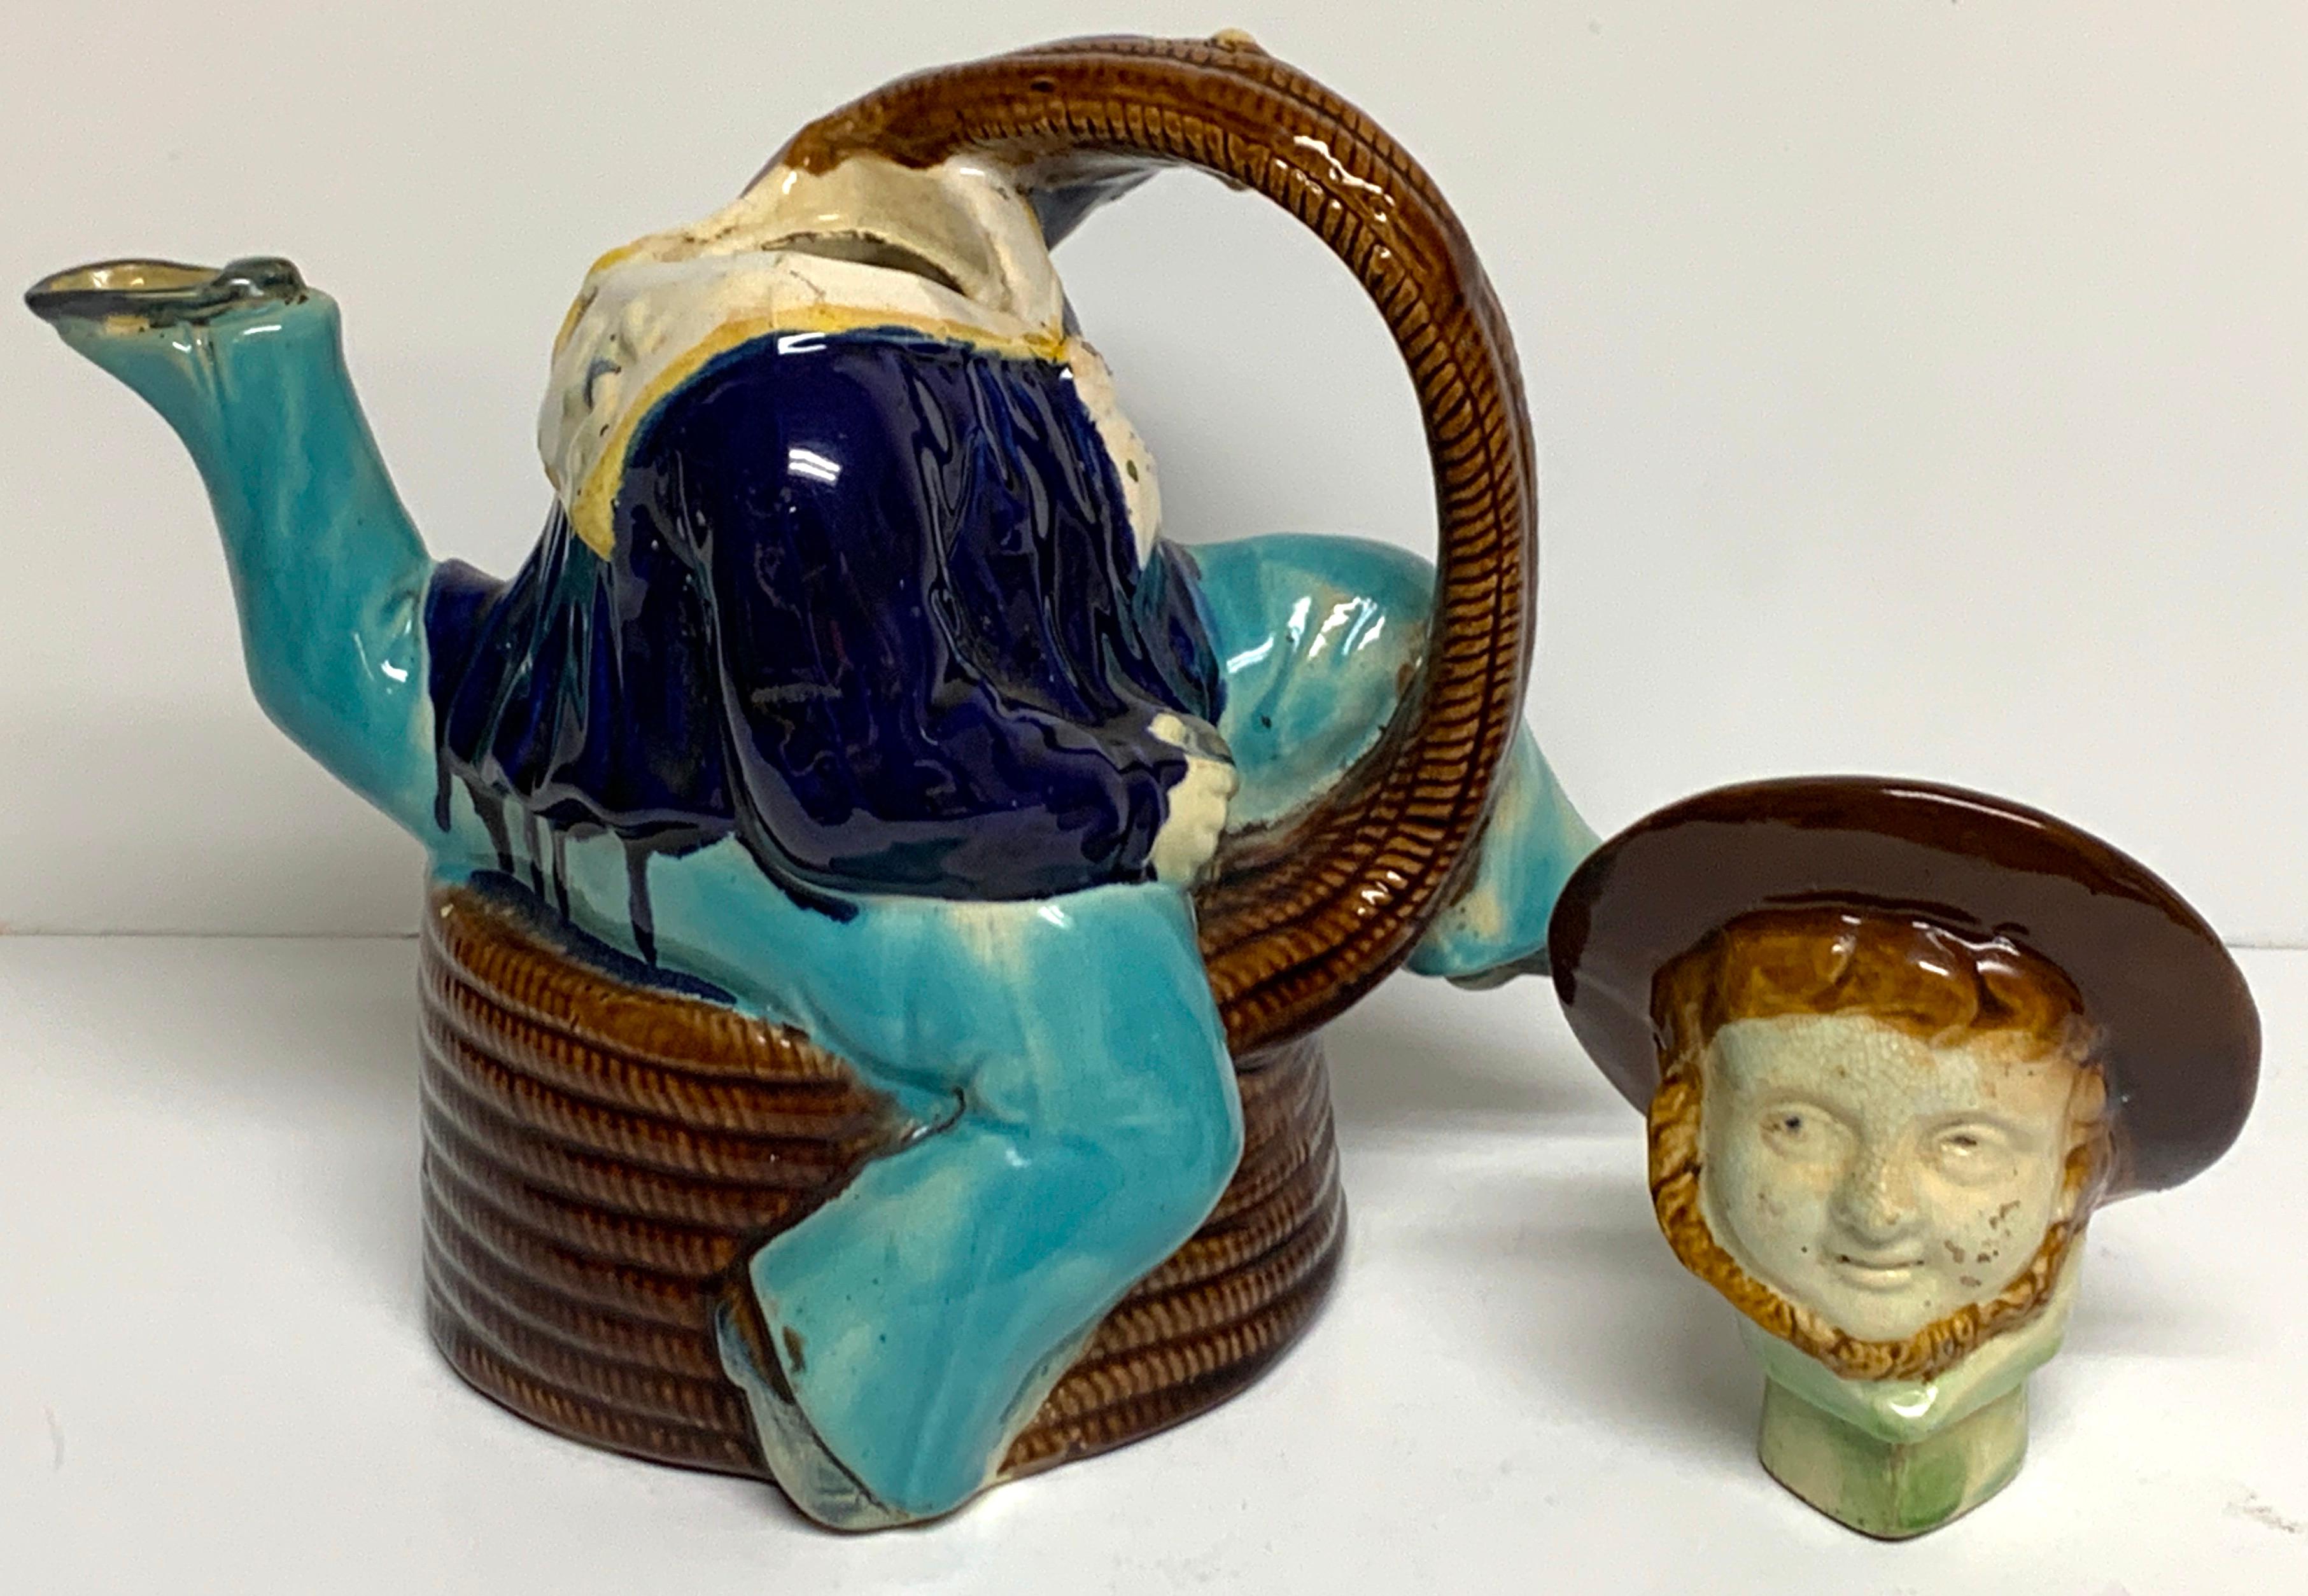 Isle of Man Majolica 'Manx Sailor' Teapot, by William Brownfield & Sons 3